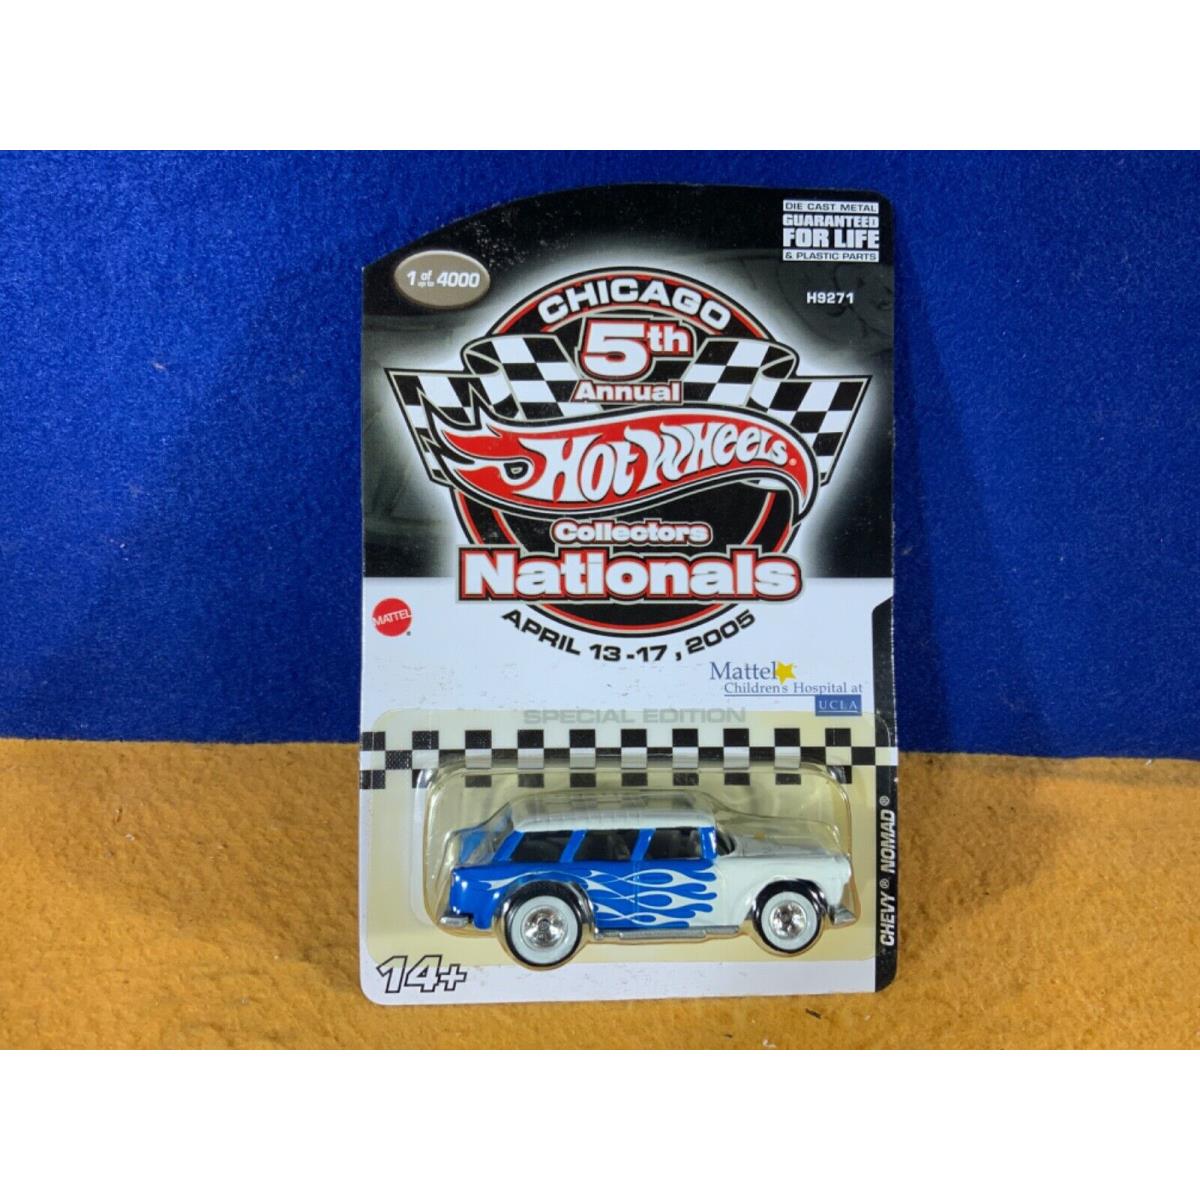 R9-56 Hot Wheels 2005 5th Collectors Nationals - Chevy Nomad - Blue